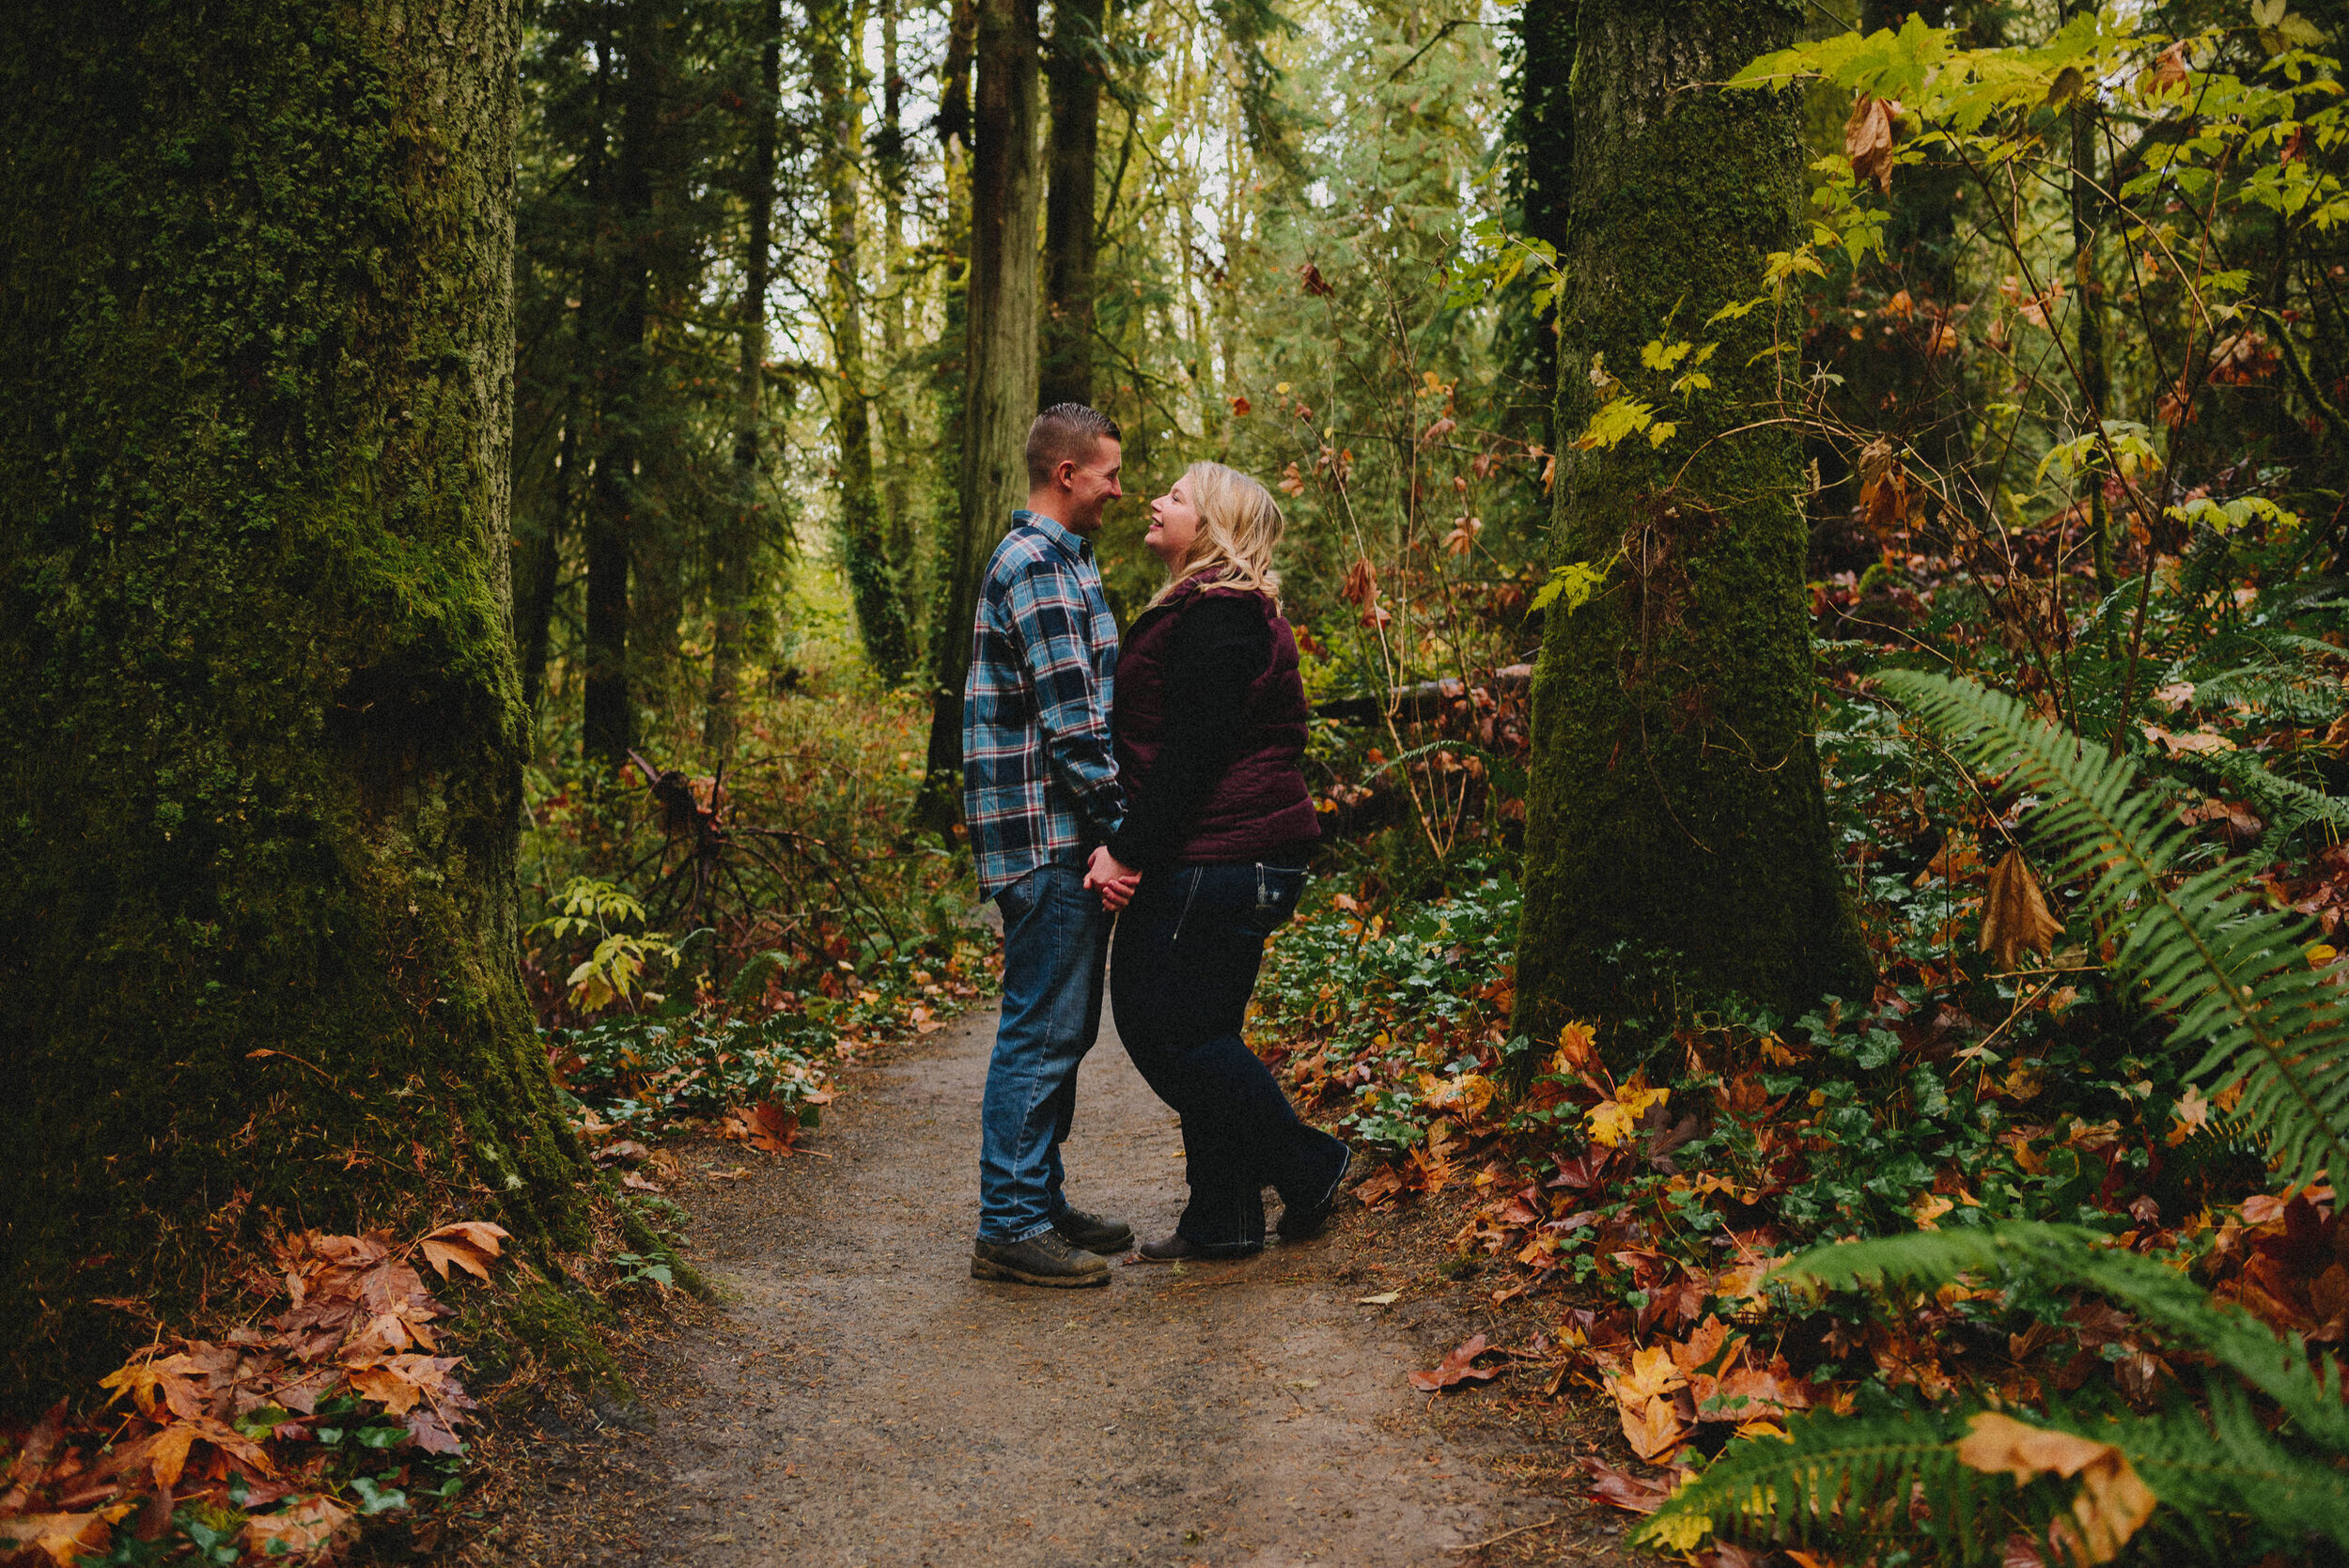 priest-point-park-couples-session-olympia-washington-way-up-north-photography (56).jpg